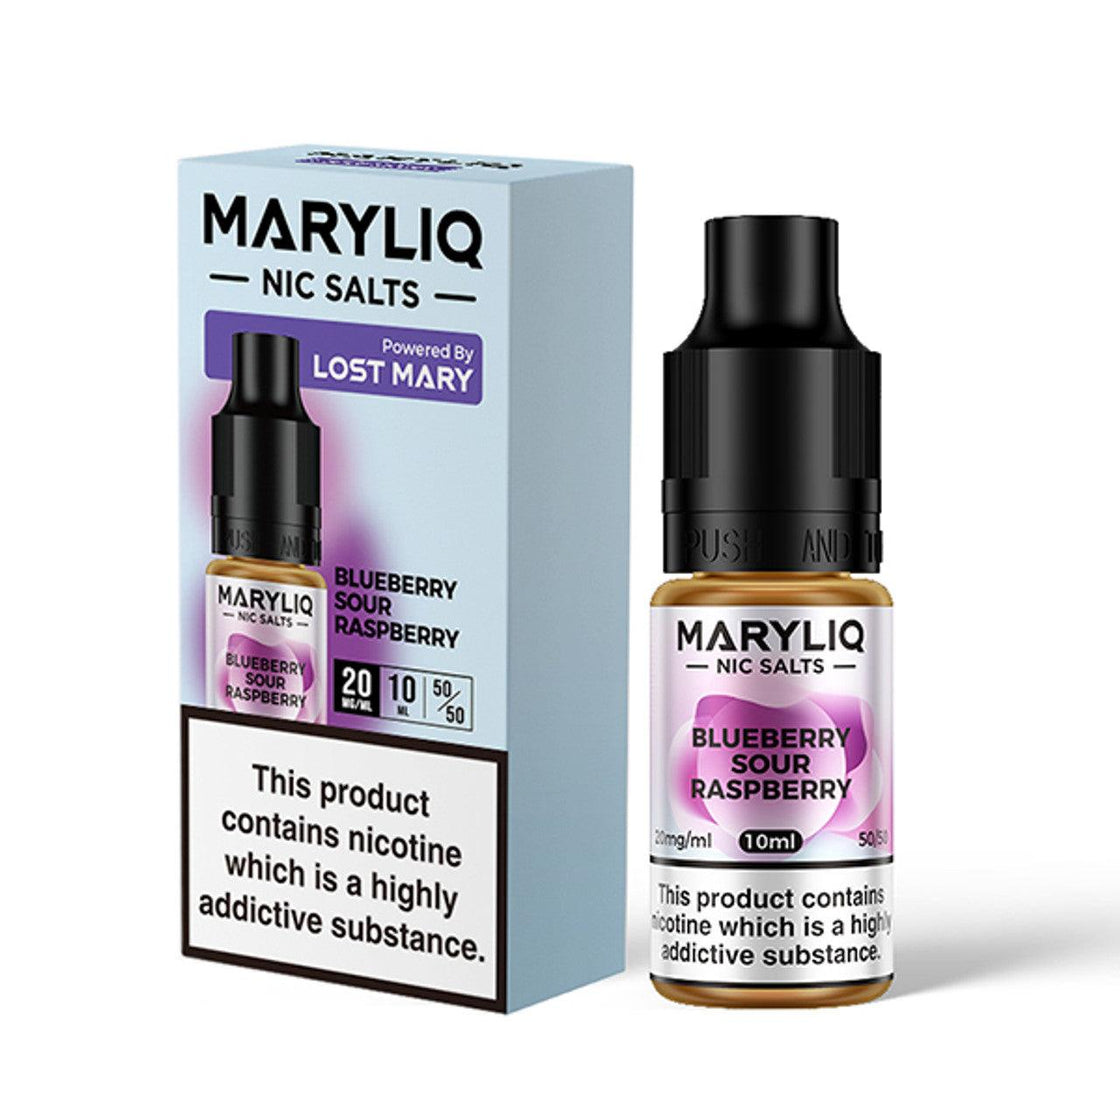 BLUEBERRY SOUR RASPBERRY 10ML E-LIQUID NICOTINE SALT BY MARYLIQ - LOST MARY - Vapeslough